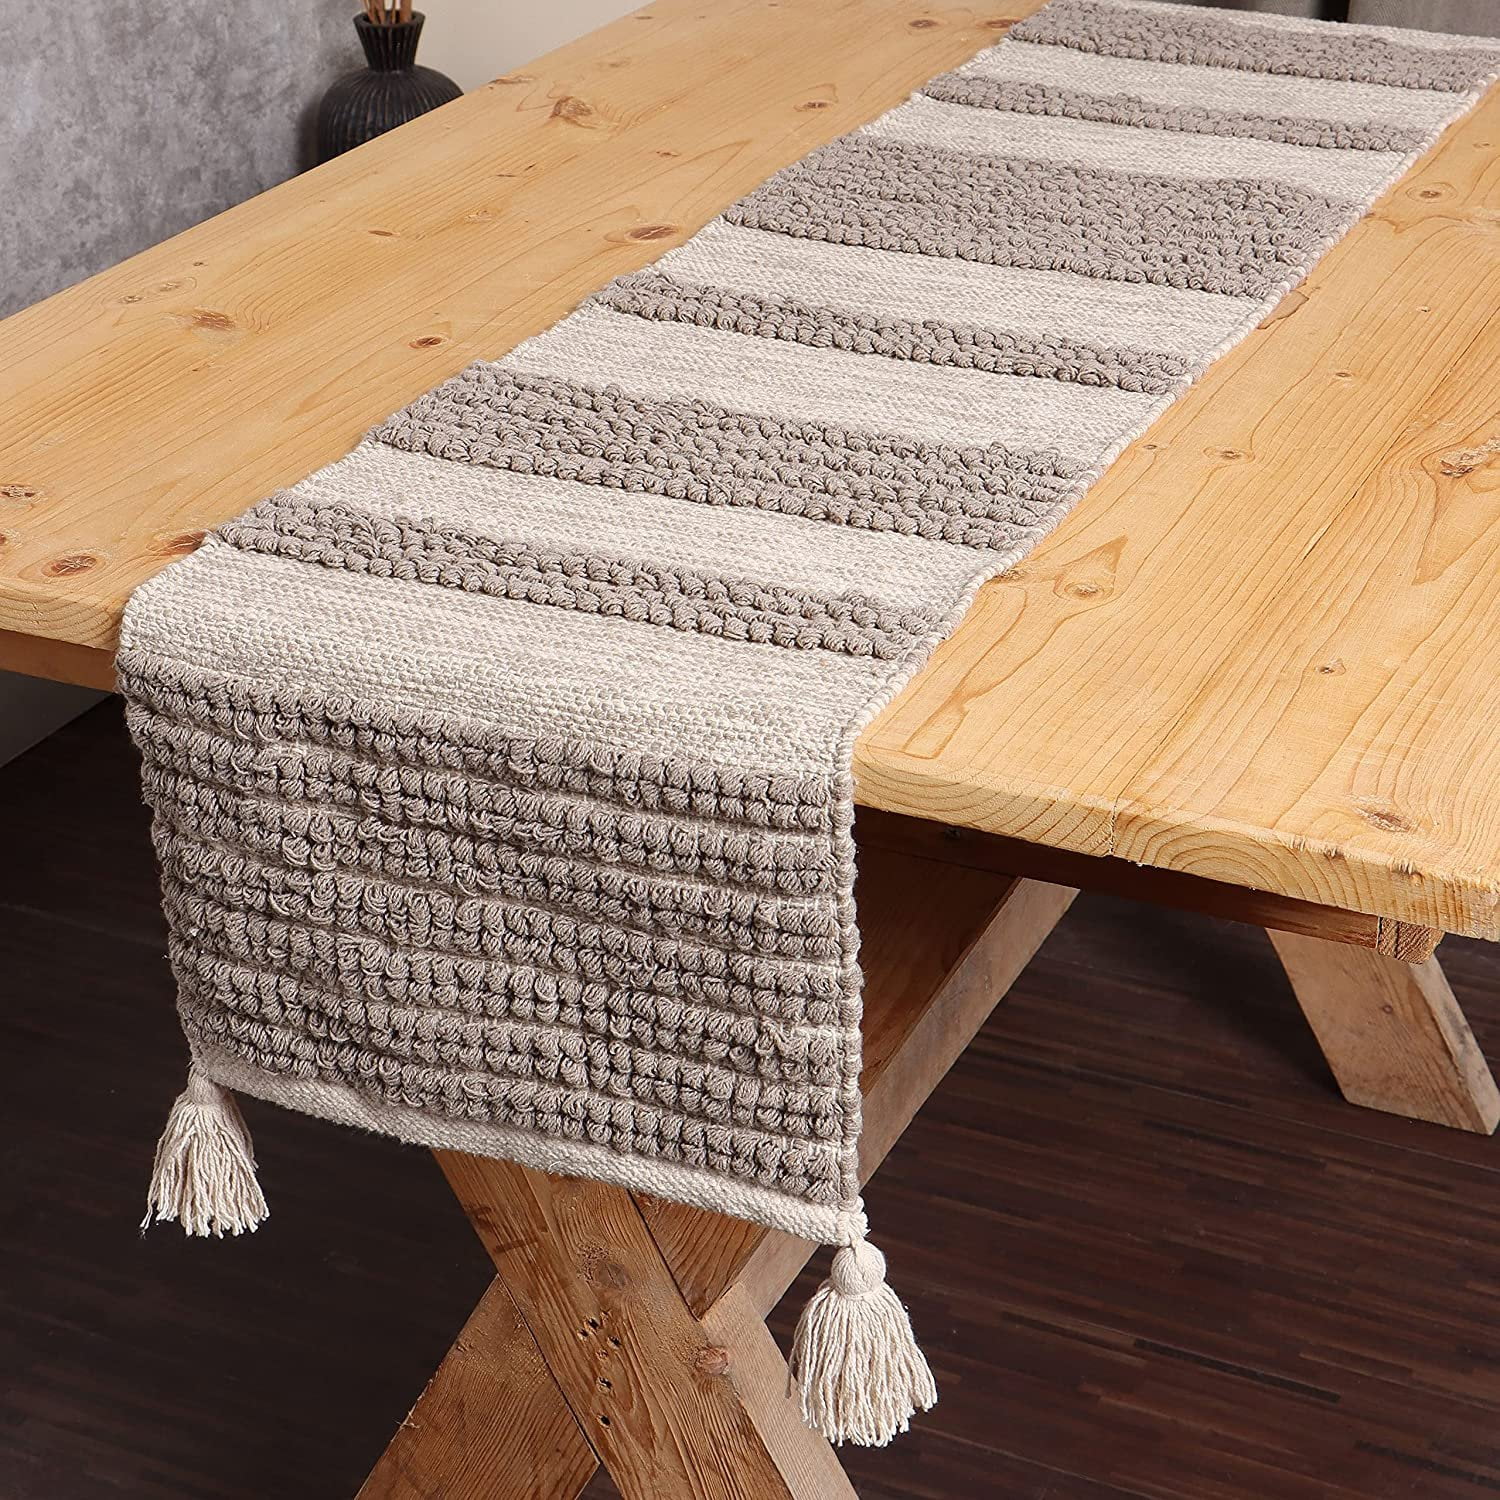 Redearth Table Runner Hand Woven, Runner For Round Coffee Table